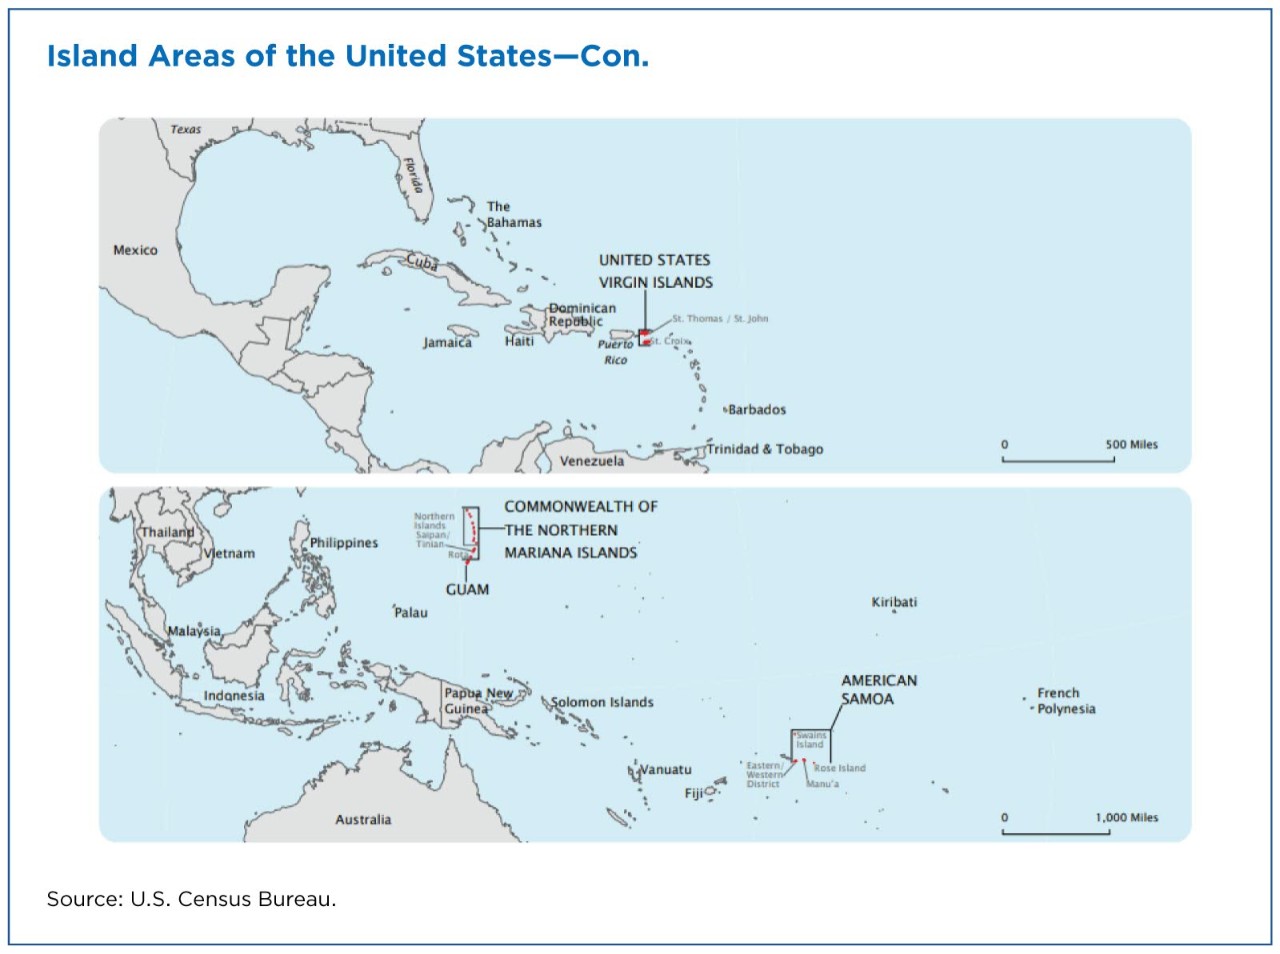 Island areas of the United States - Con.